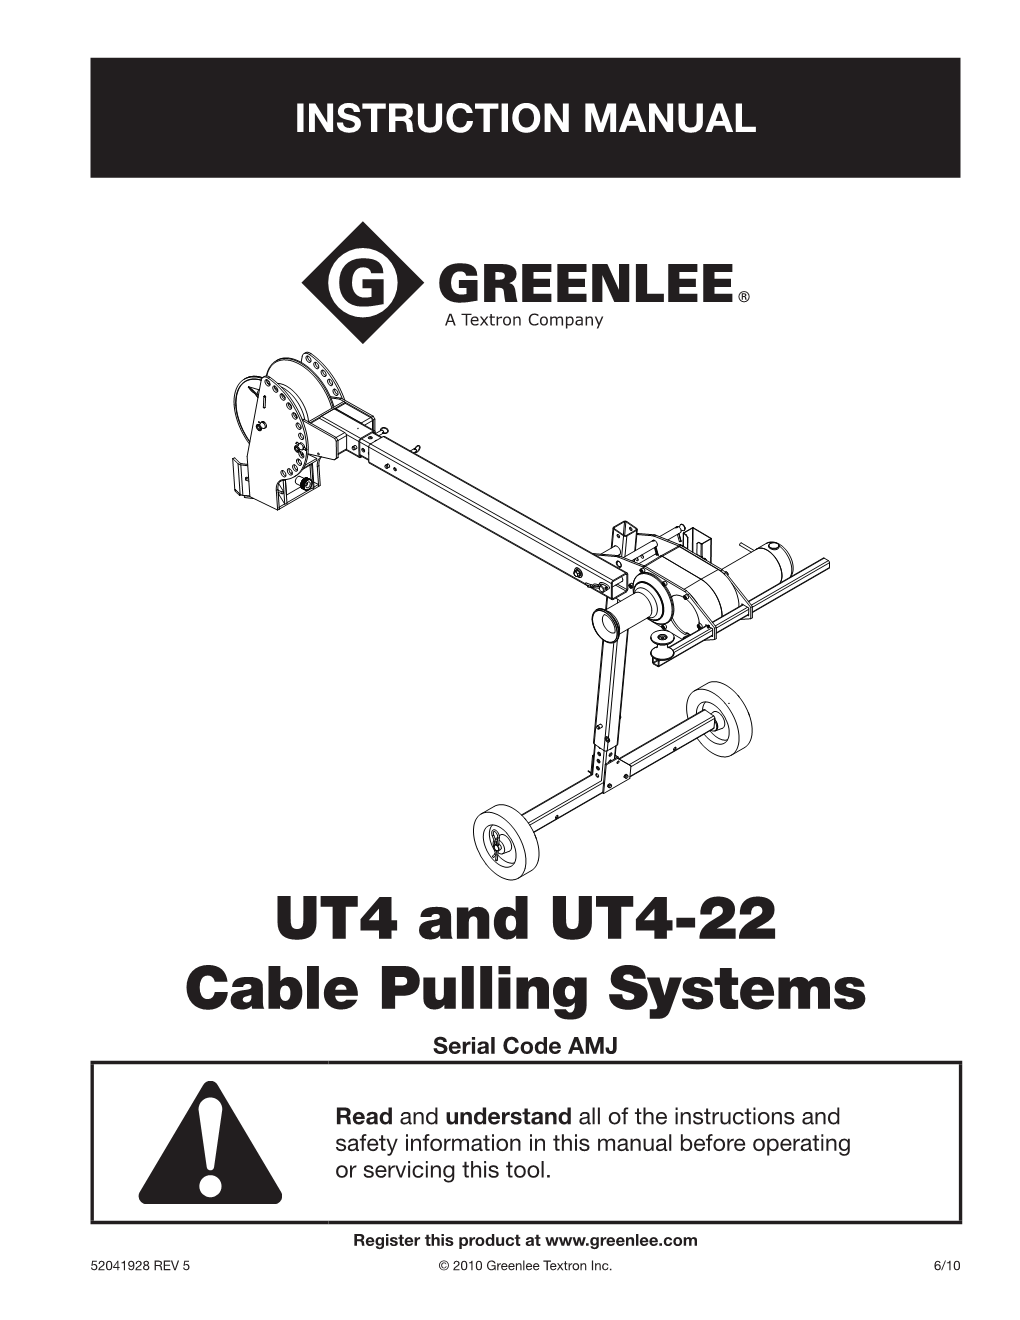 UT4 and UT4-22 Cable Pulling Systems Serial Code AMJ